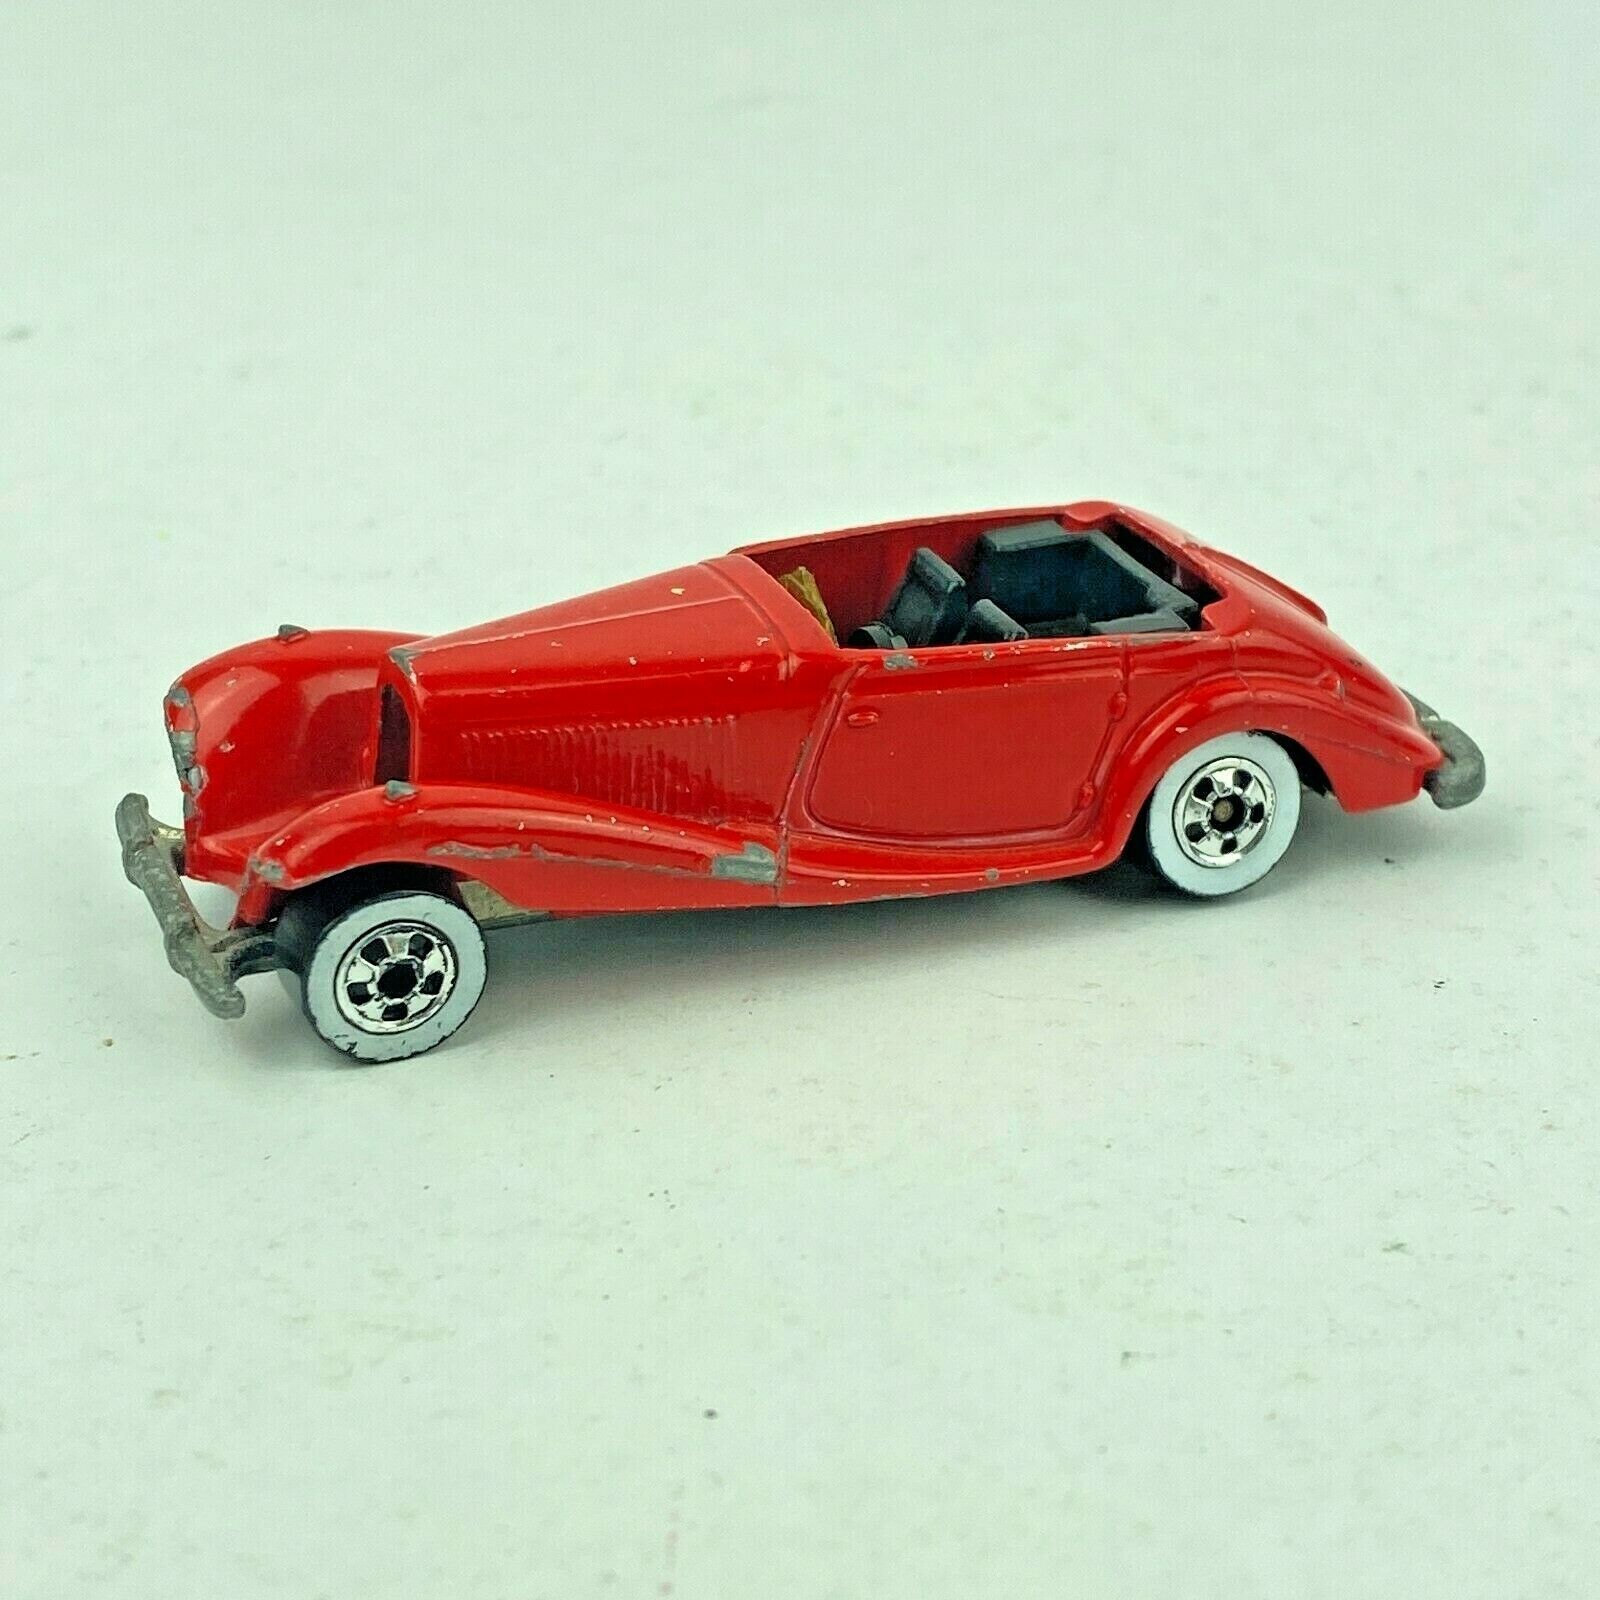 Primary image for Mattel Hot Wheels Red Mercedes 540K Sports Car 1982 Diecast Toy Car